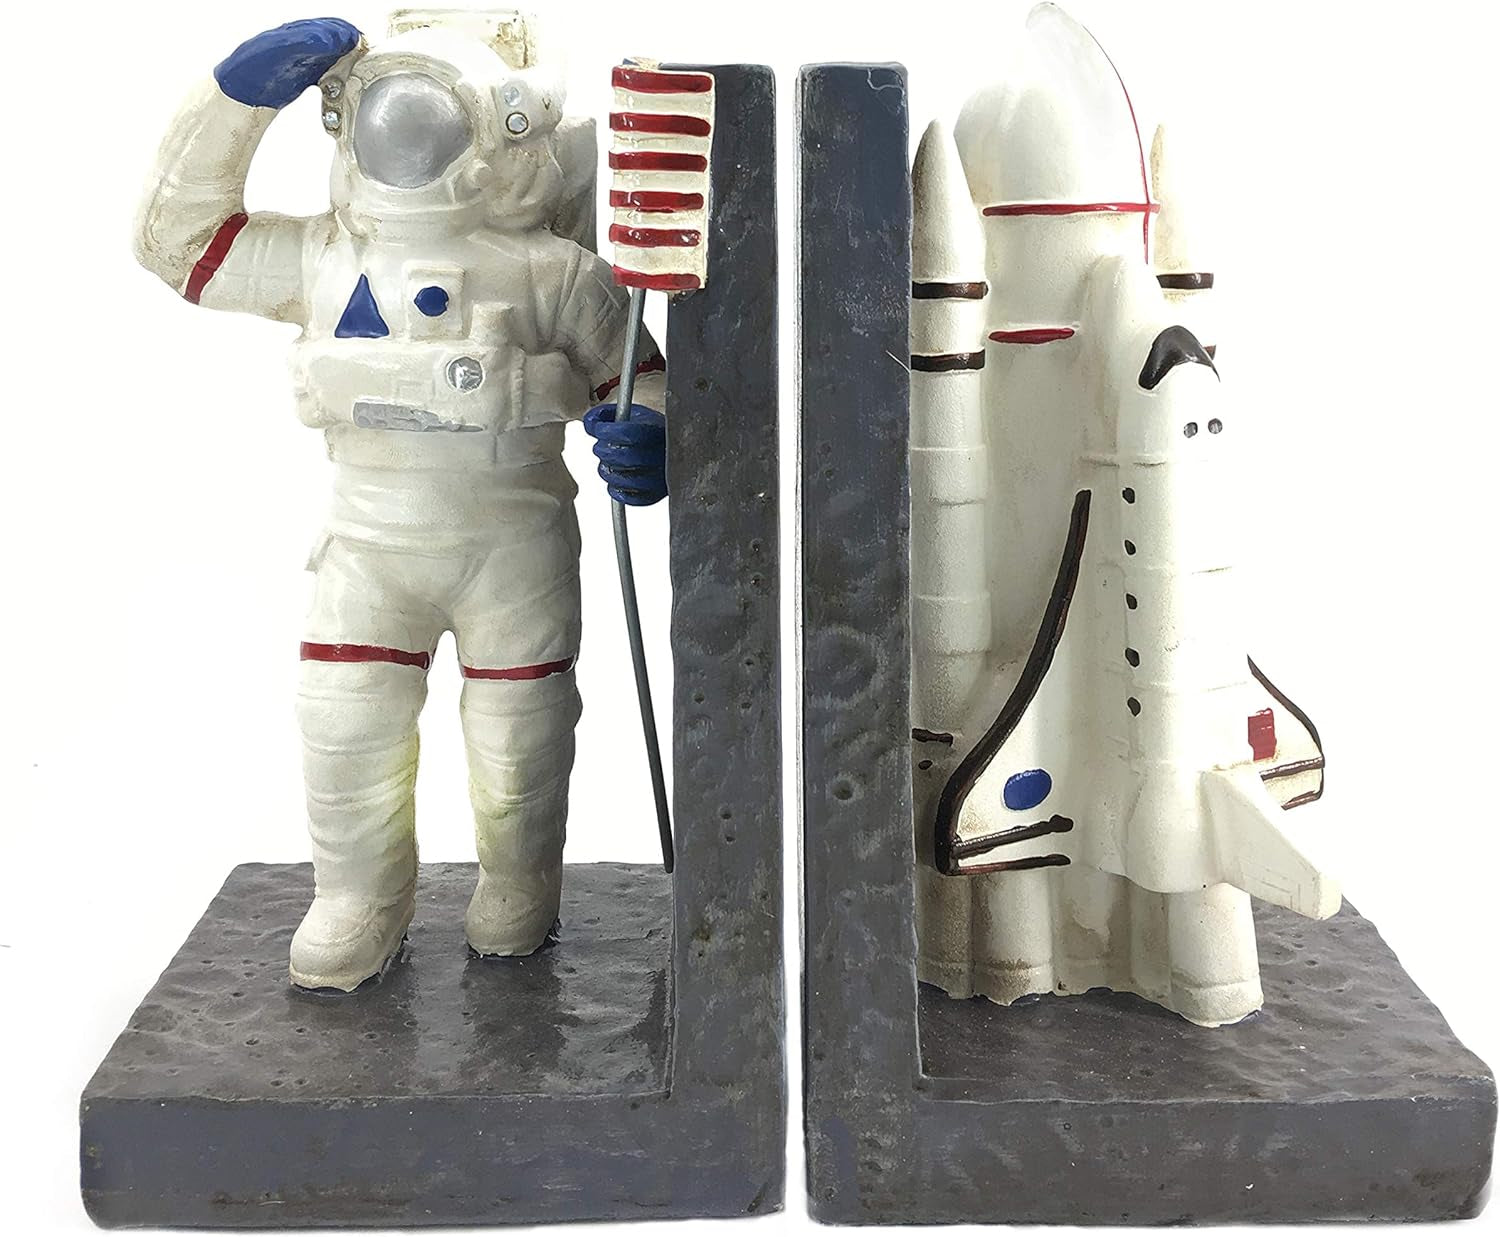 24650 Decorative Bookends Astronaut Space Rocket Ship Book Ends Stoppers Holders Unique Modern Home Accents 7 Inch Tall